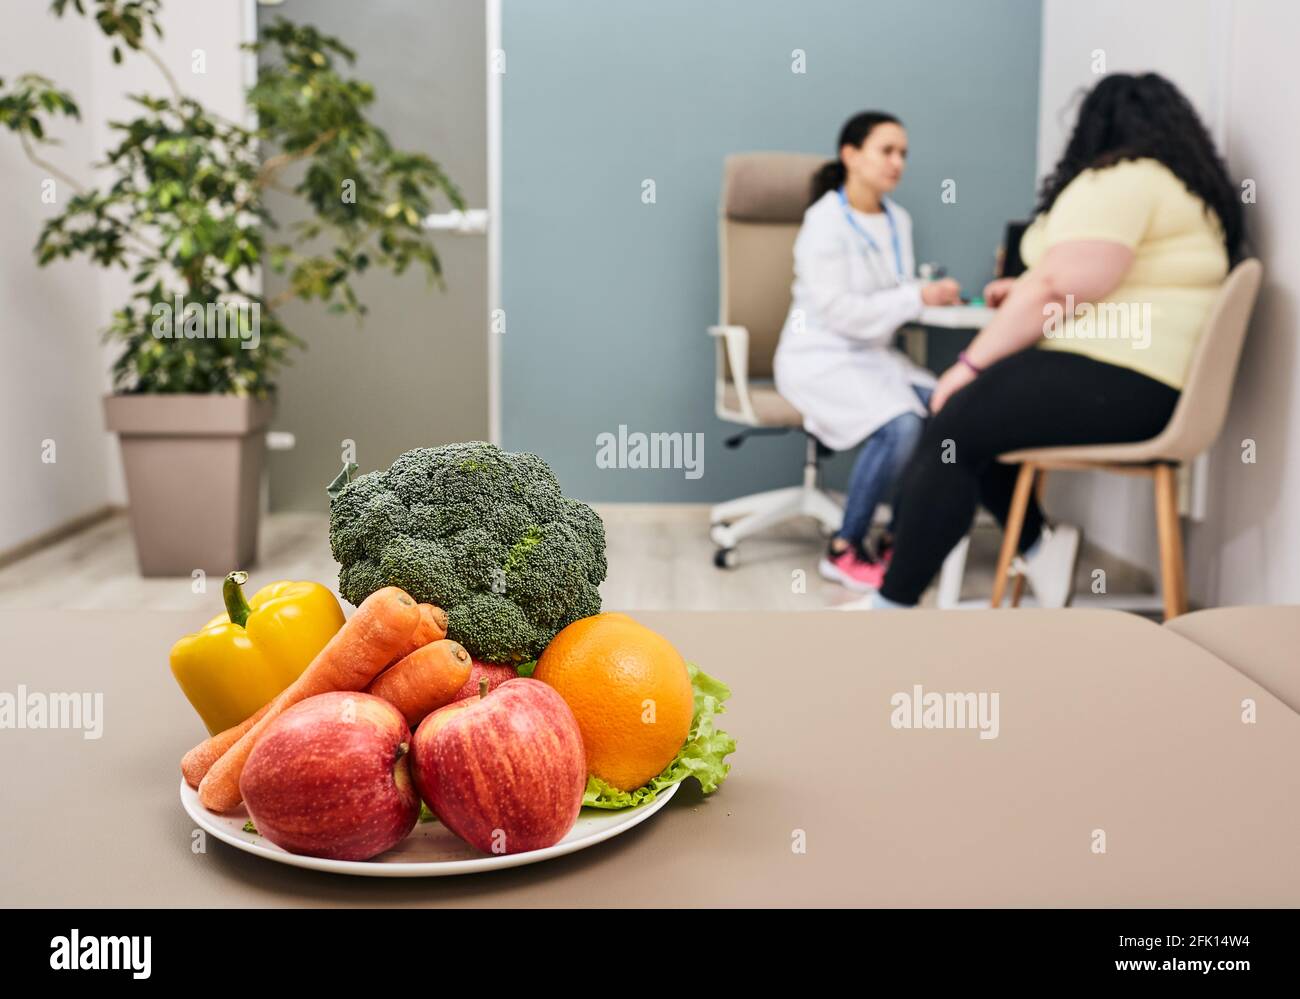 Healthy diet. Dietitian plans meal plan and diet to weight loss for a female obese patient Stock Photo